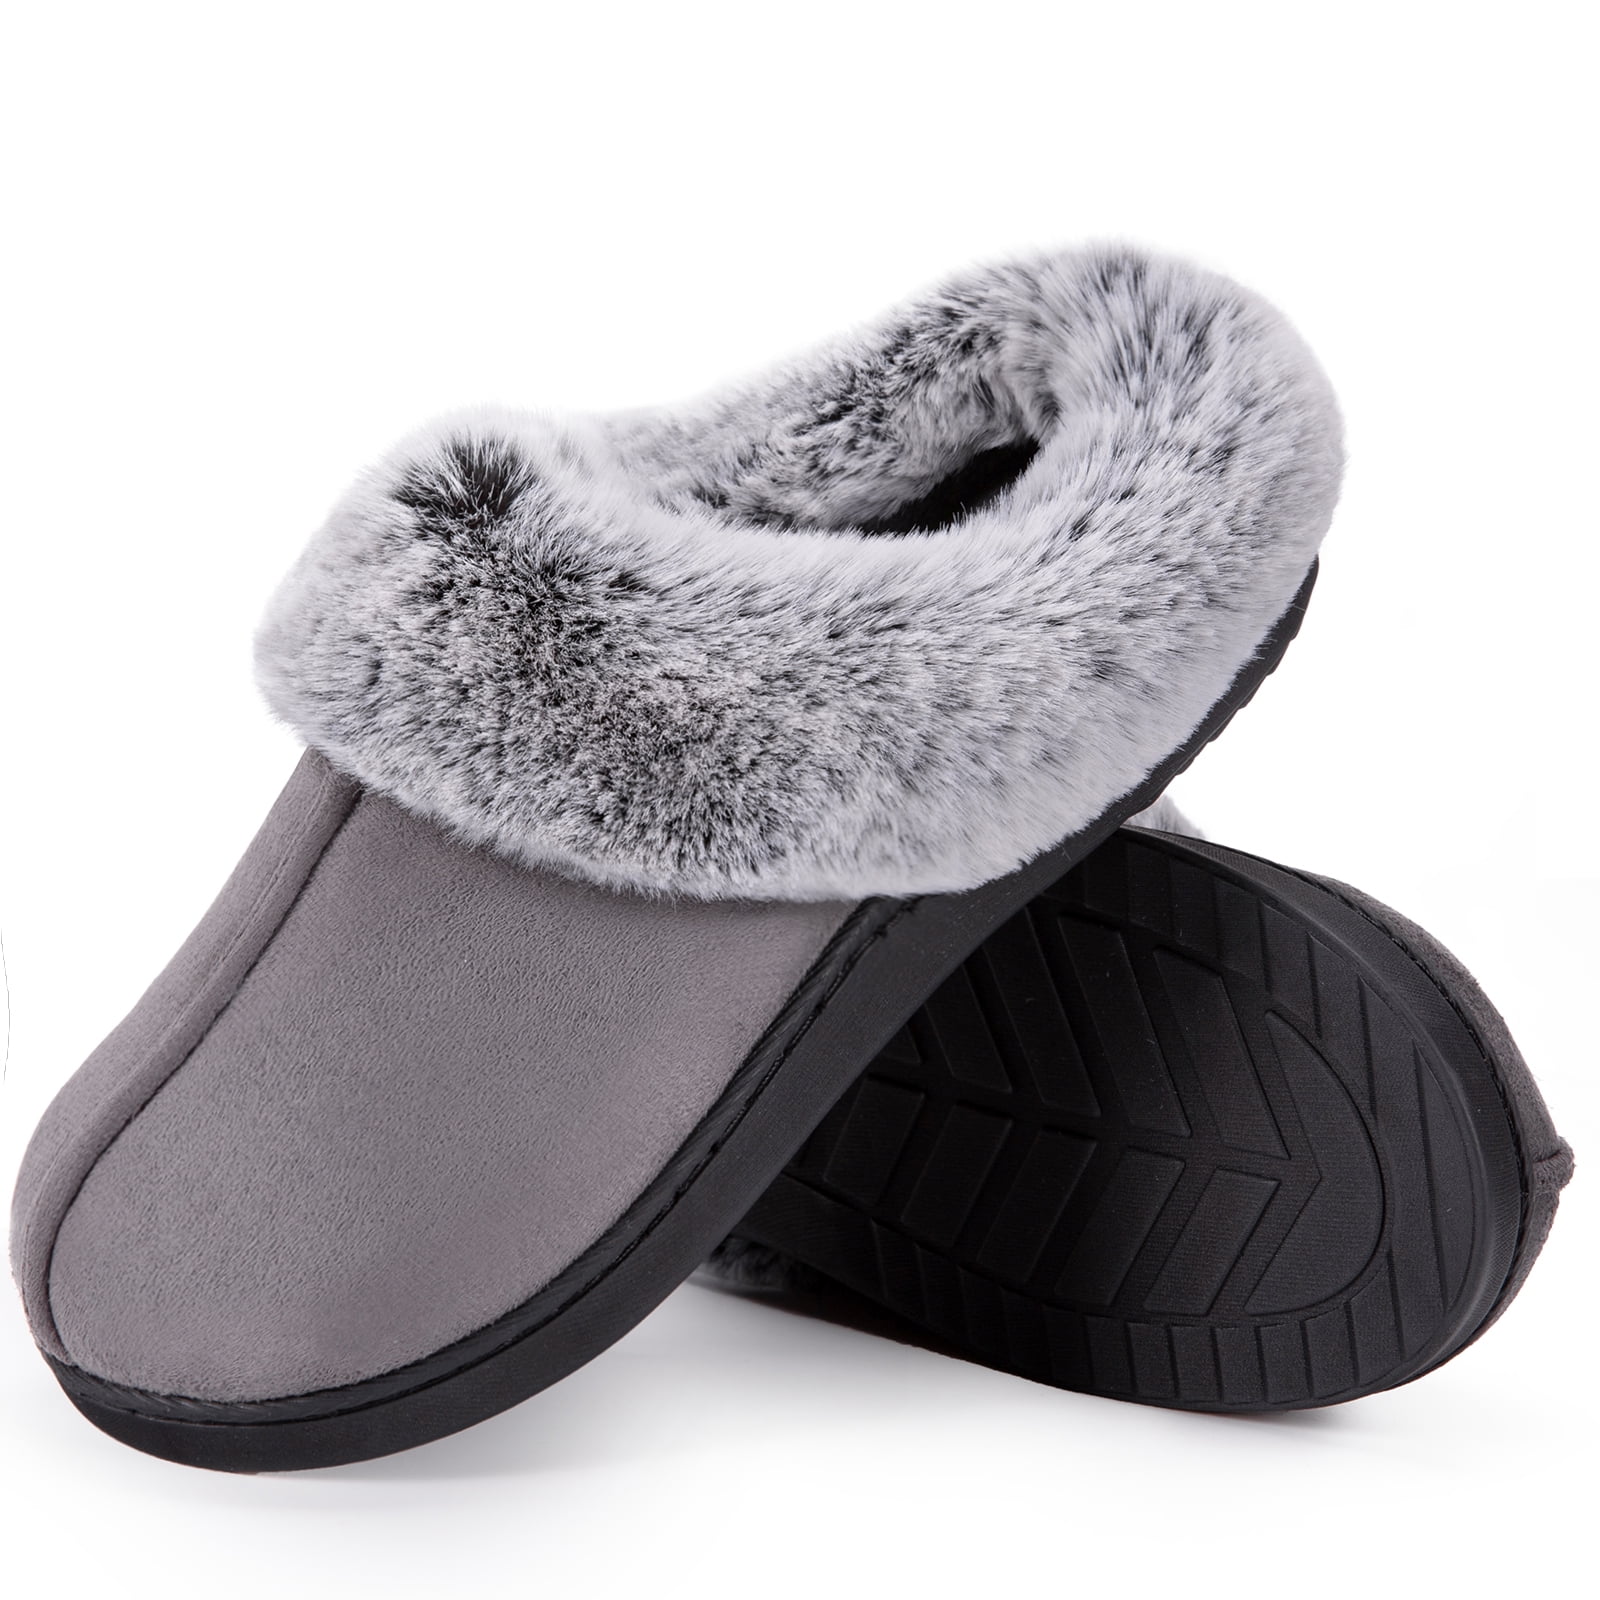 Forfoot Mens Winter Warm Memory Foam Faux Cashmere Fleece Lined Suede Slip-on Indoor House Slippers